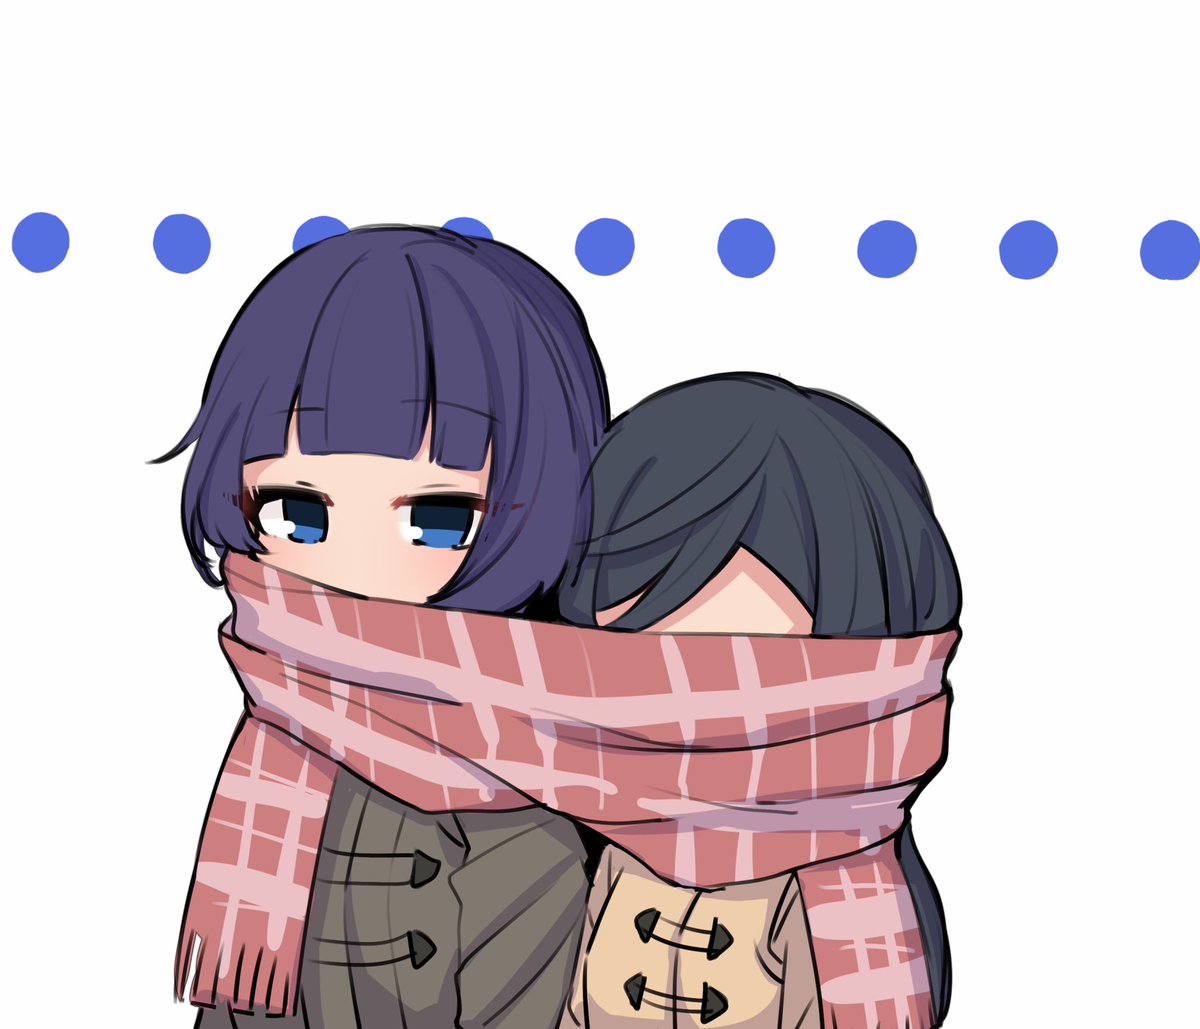 shared clothes shared scarf 2girls multiple girls scarf blue eyes black hair  illustration images